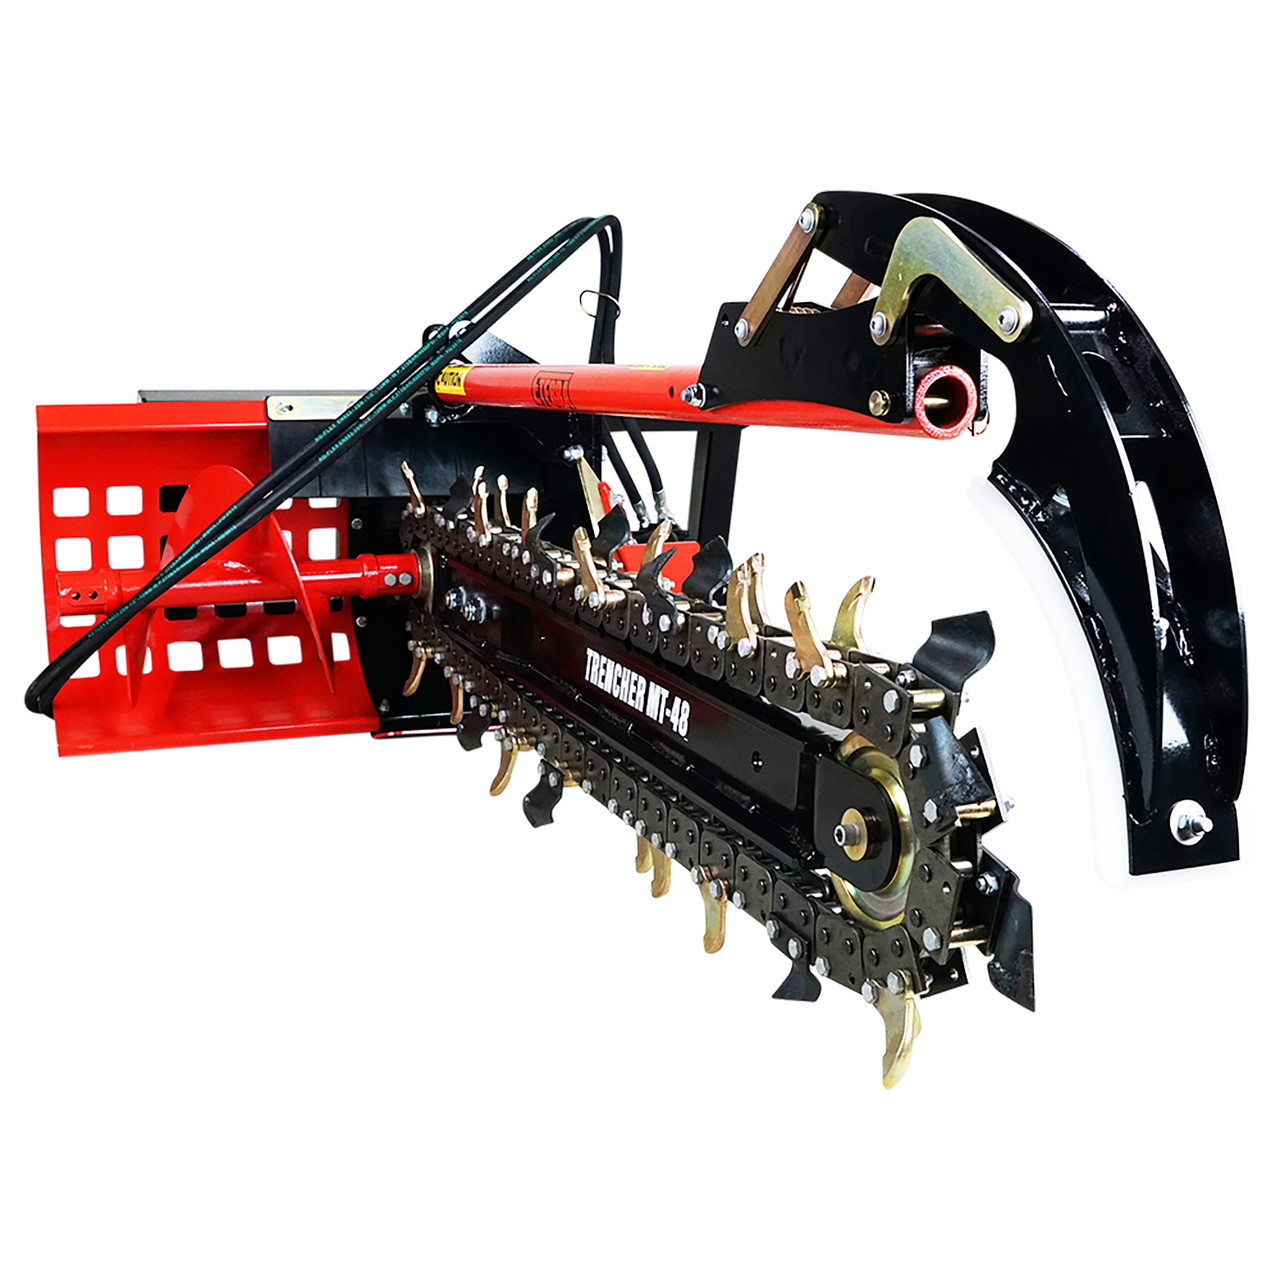 Skid Steer Trencher - Standard Flow - Up to 4ft Deep and 8 Wide